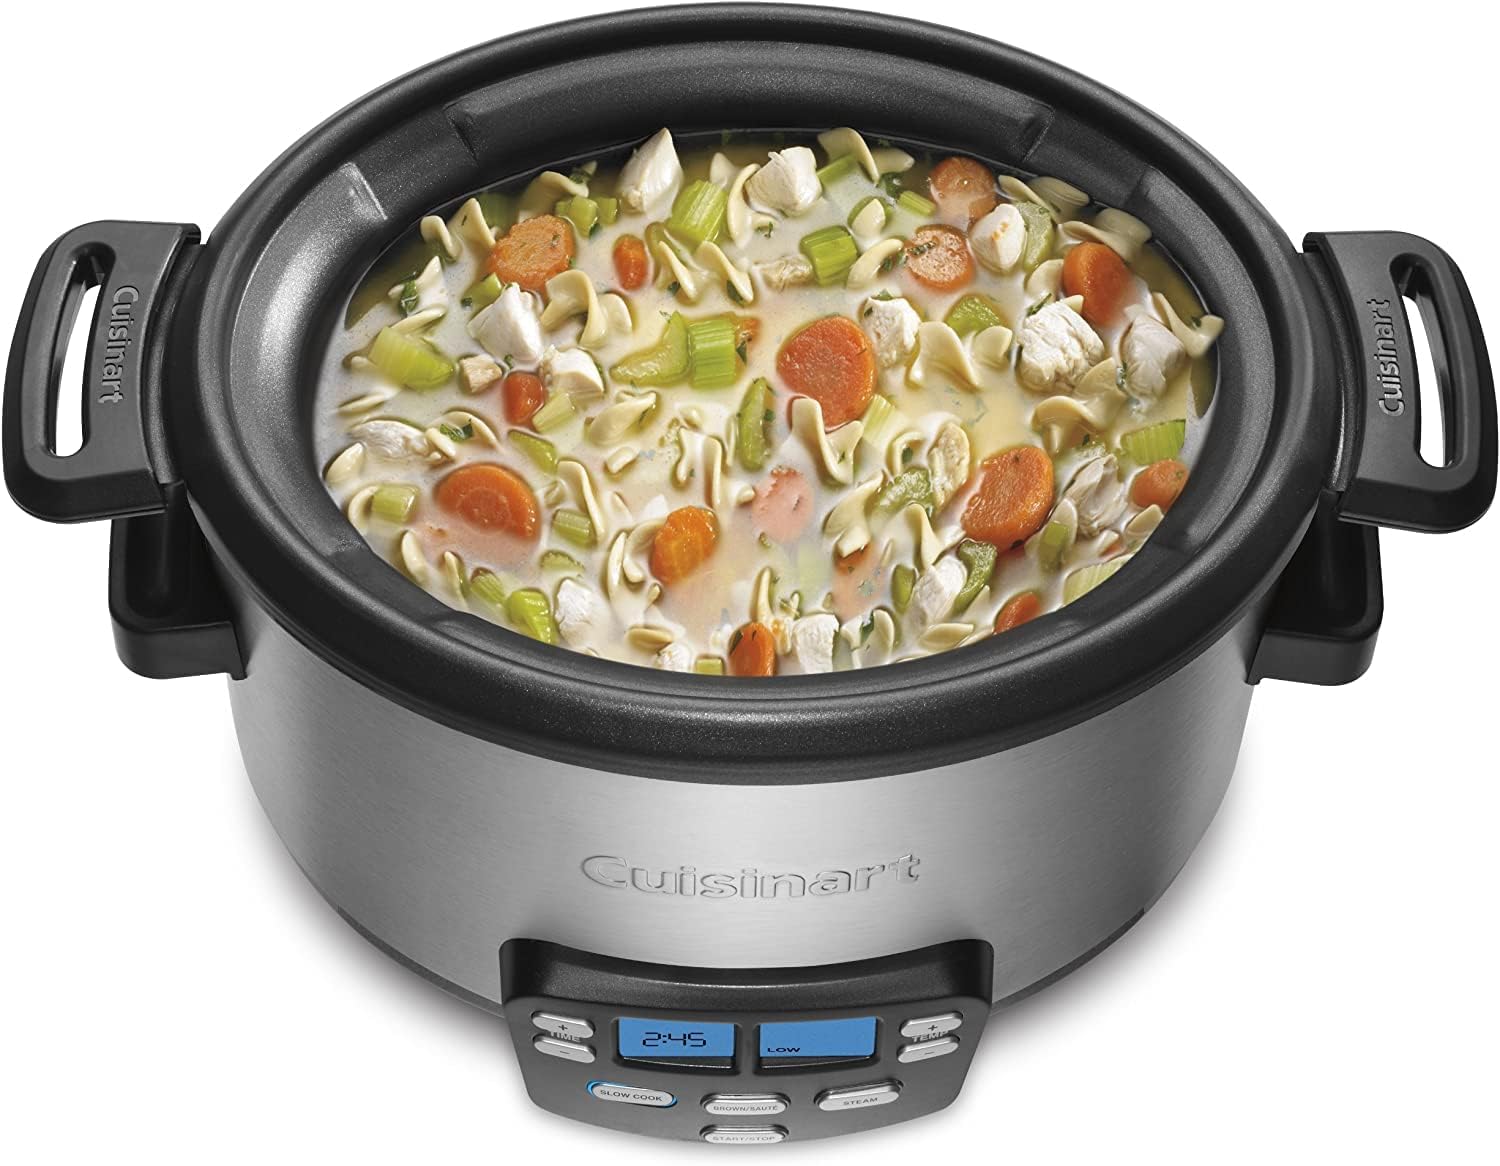 How Much Power Does A Slow Cooker Use